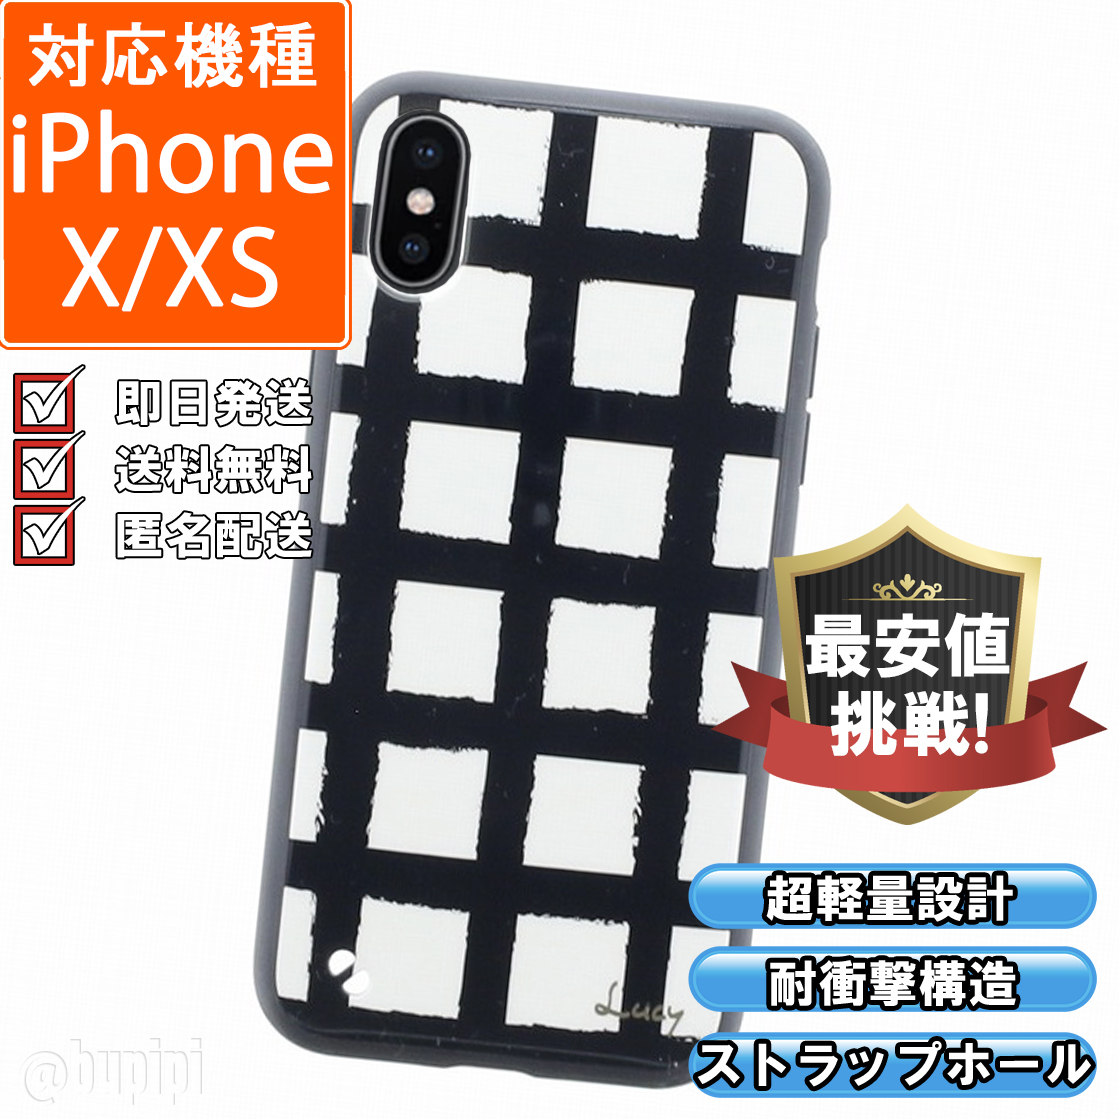 iPhone X XS Impact-proof light weight meat thickness hybrid hard case free shipping check white black 